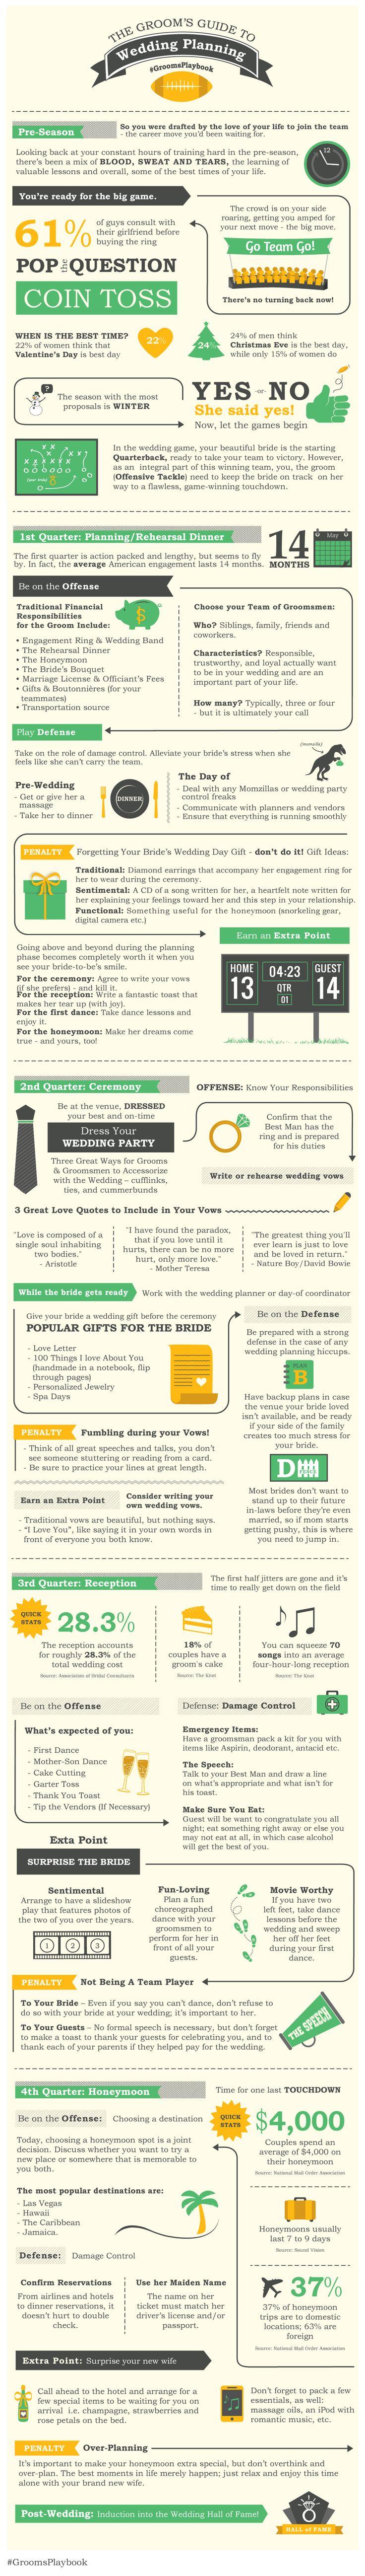 Wedding - The Grooms Guide To Wedding Planning [Infographic]